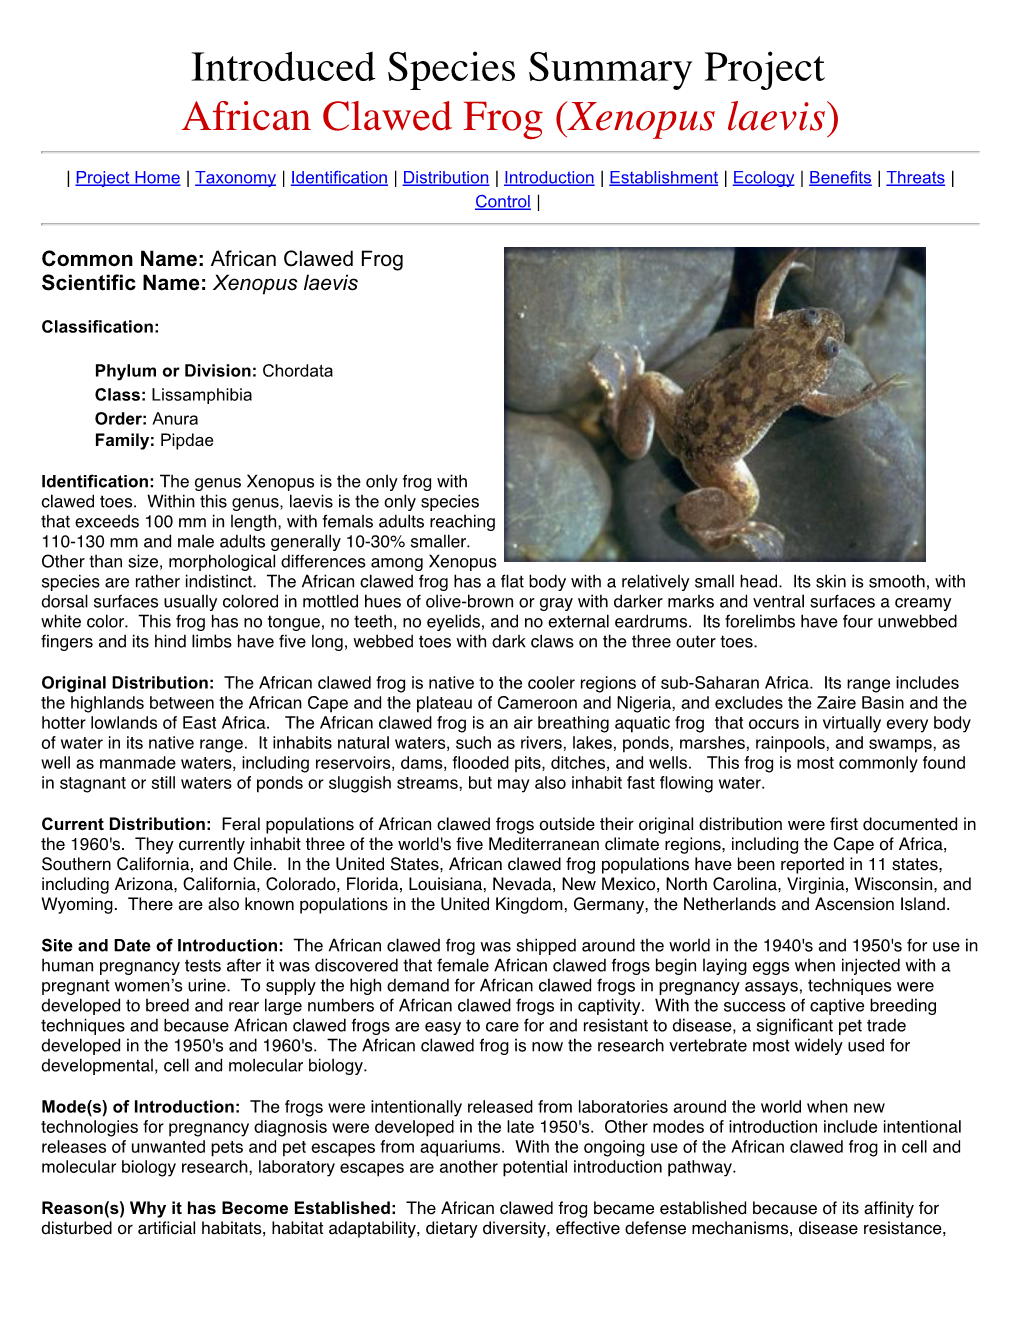 Introduced Species Summary Project African Clawed Frog (Xenopus Laevis)